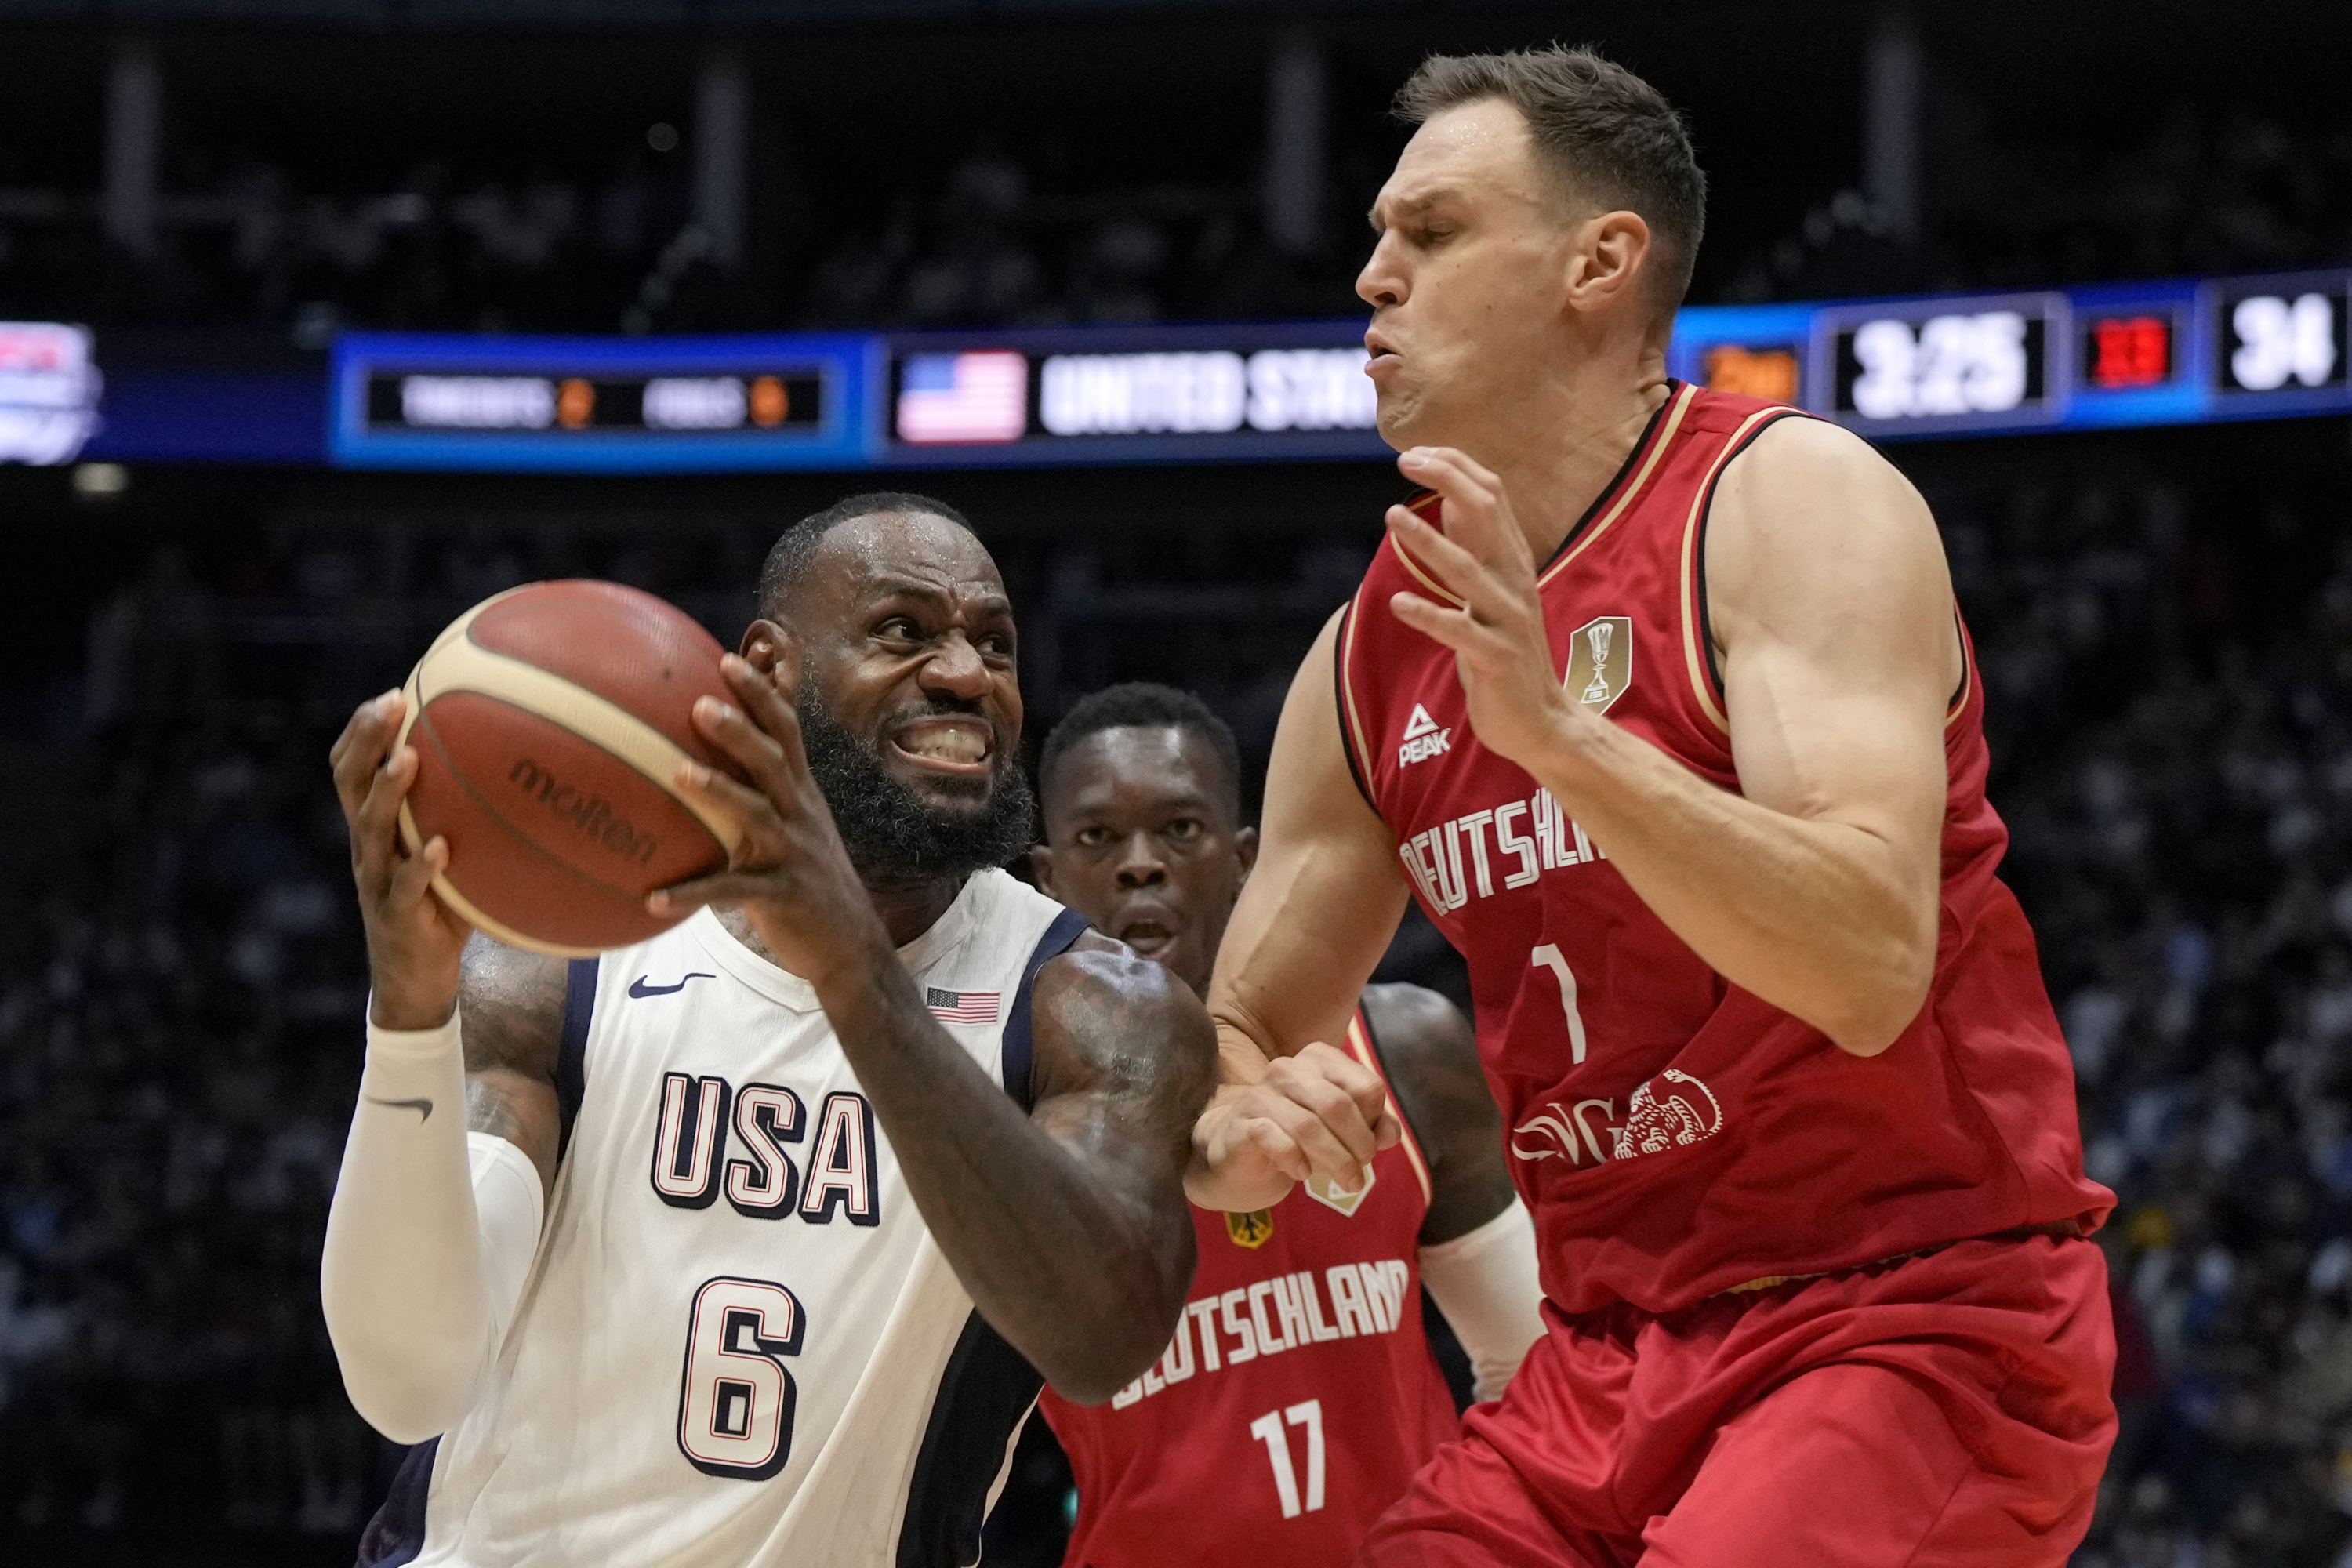 Germany's Johannes Voigtmann, right, blocks United States' forward LeBron James during an exhibition basketball game between the United States and Germany at the O2 Arena in London, Monday, July 22, 2024. (AP Photo/Alastair Grant)